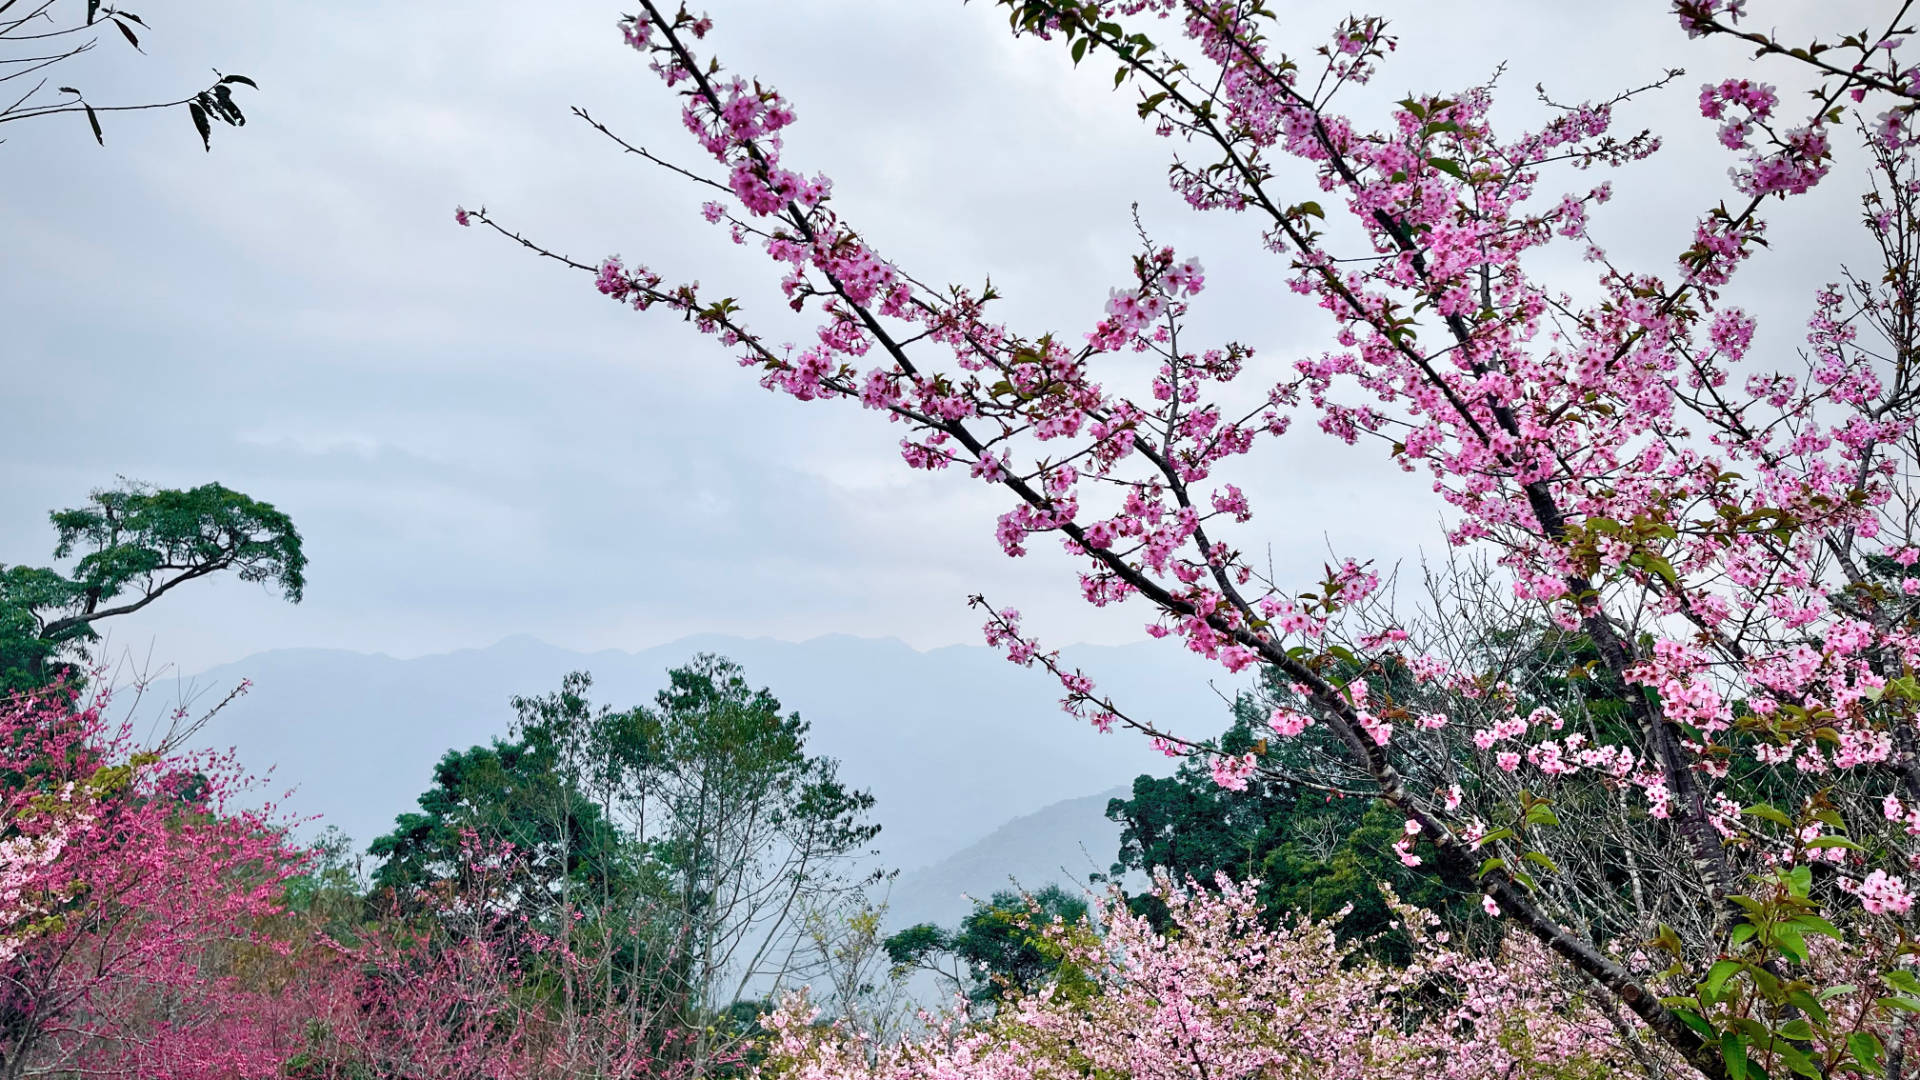 Two shades of cherry blossom in the foreground, with hazy mountains visible in the distance.